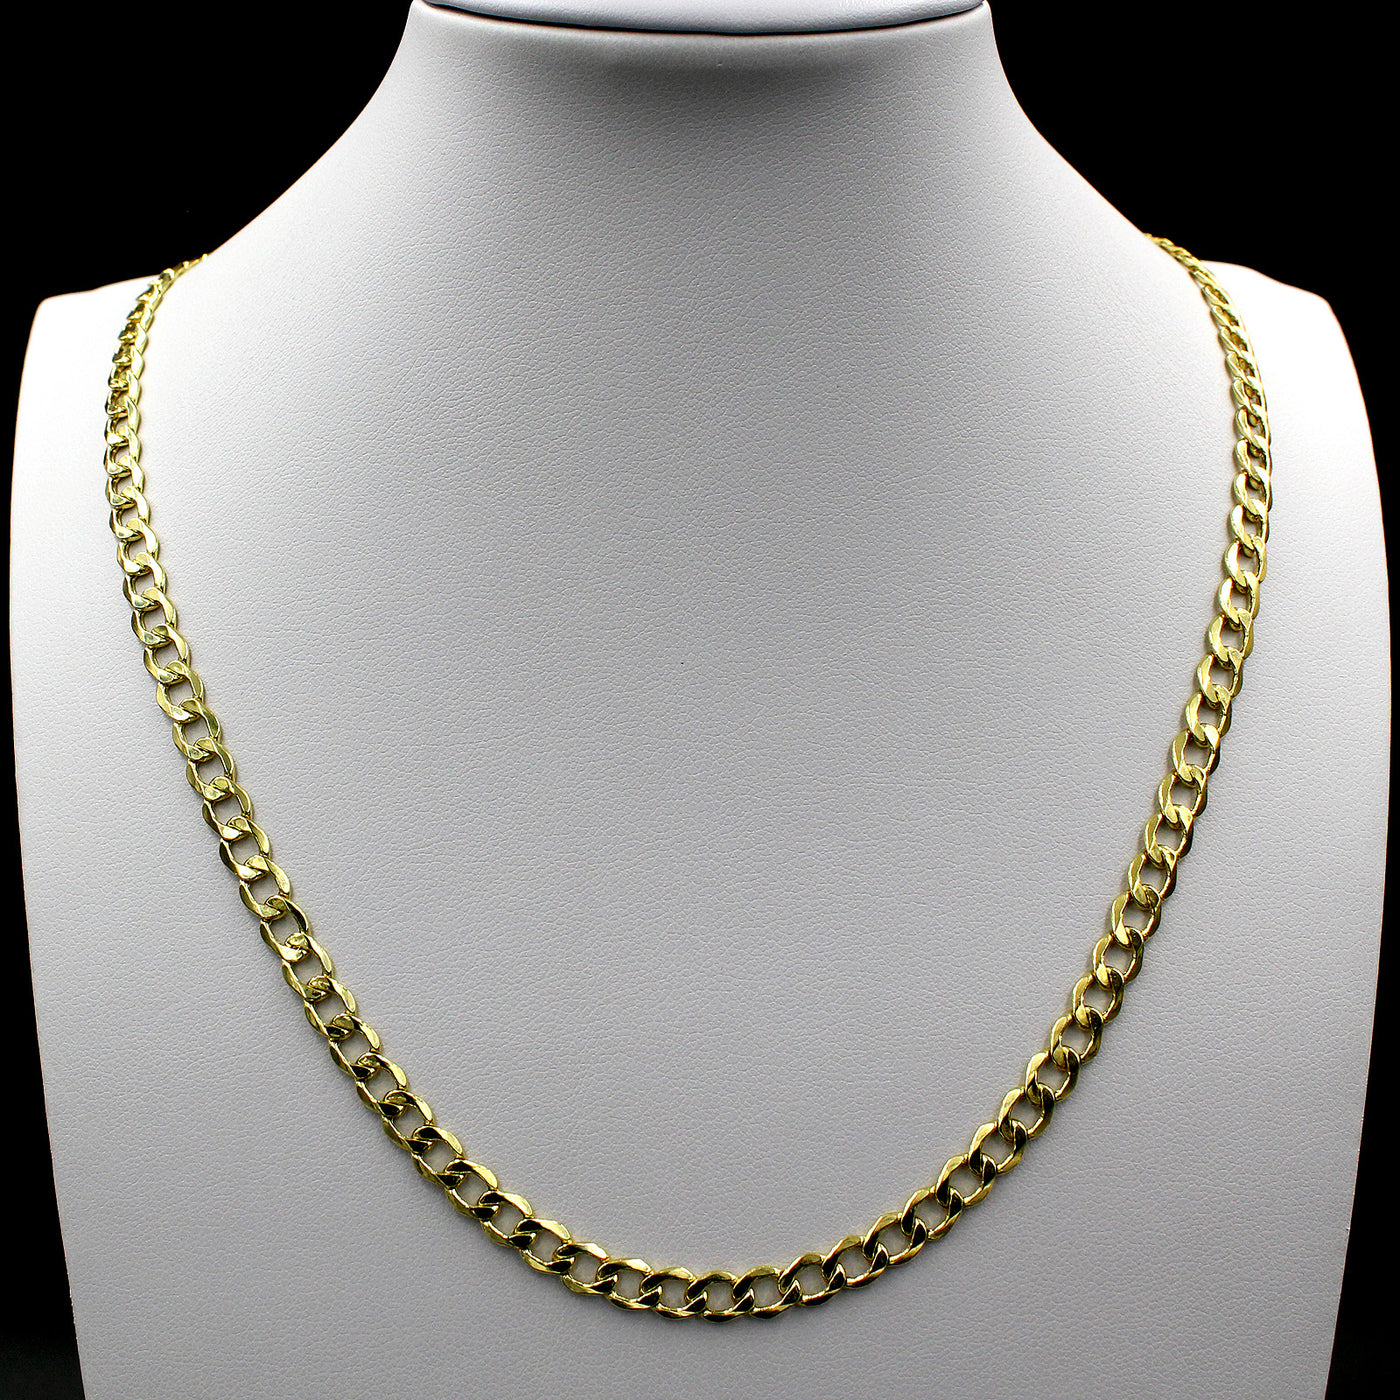 10K Solid Yellow Gold Cuban Link Chain Necklace 5.5MM 18" 20" 22" 24" 26"